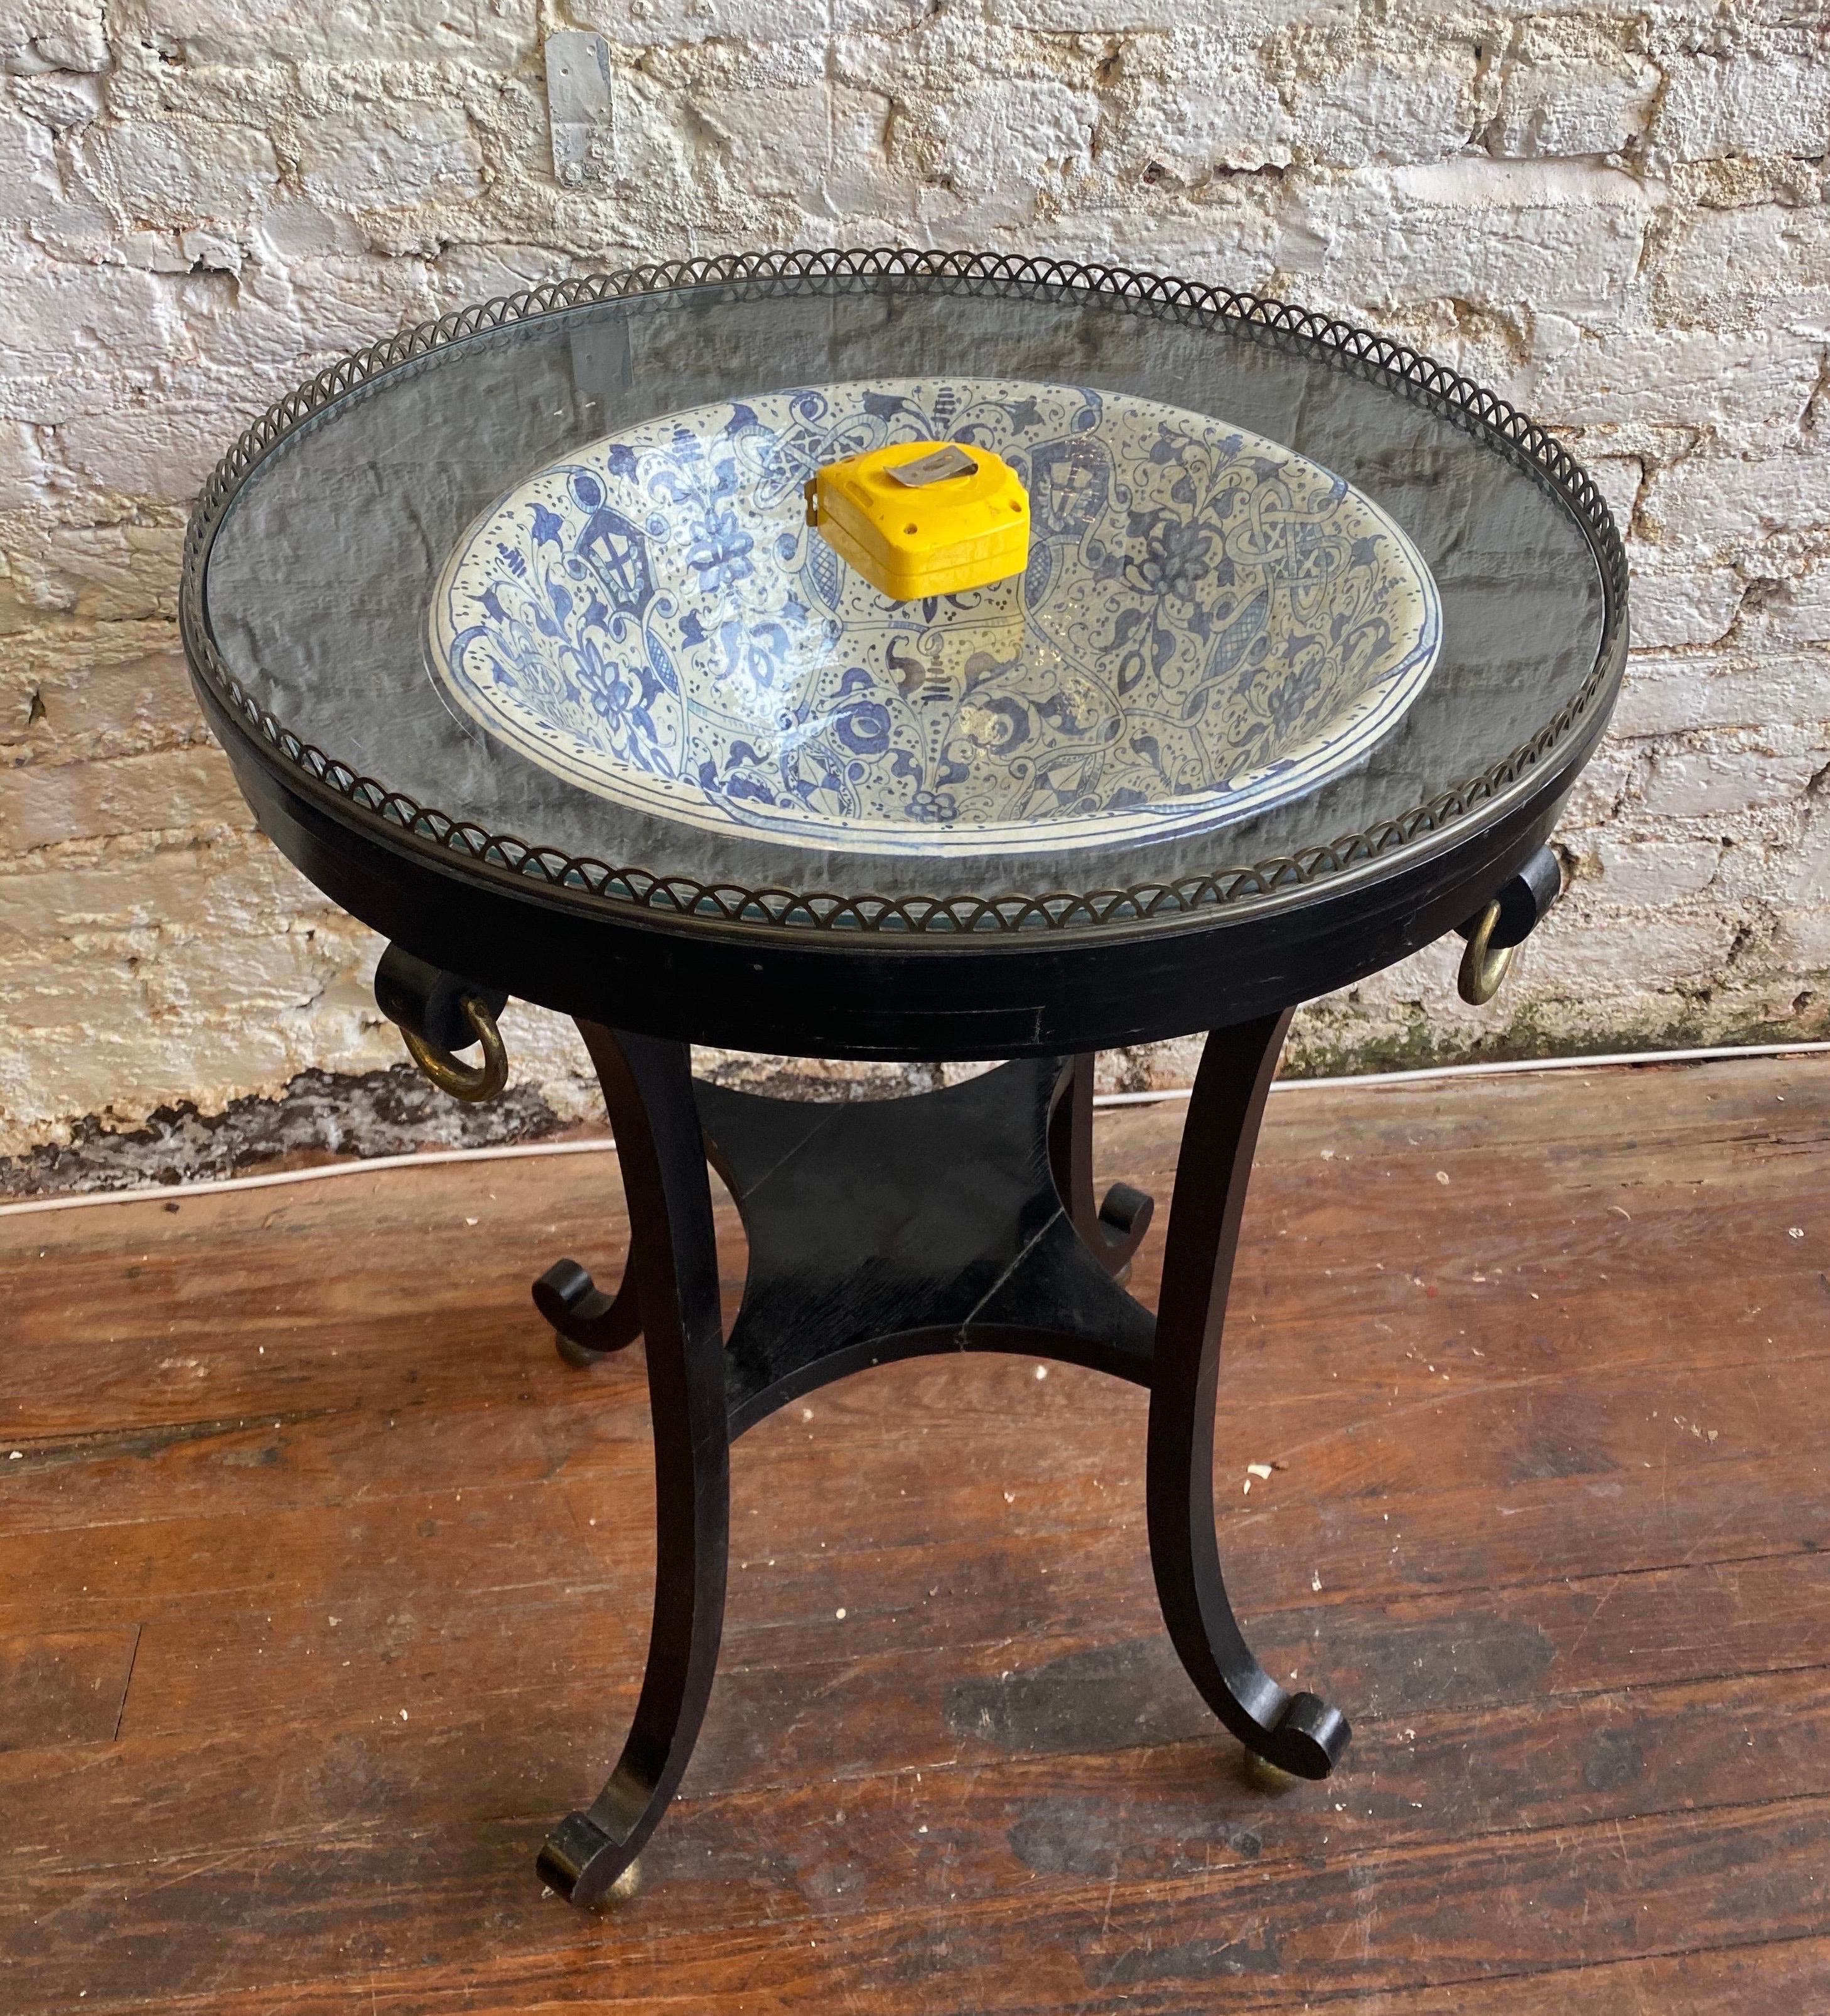 20th century ebonized table with porcelain bowl from Mario Buatta estate.